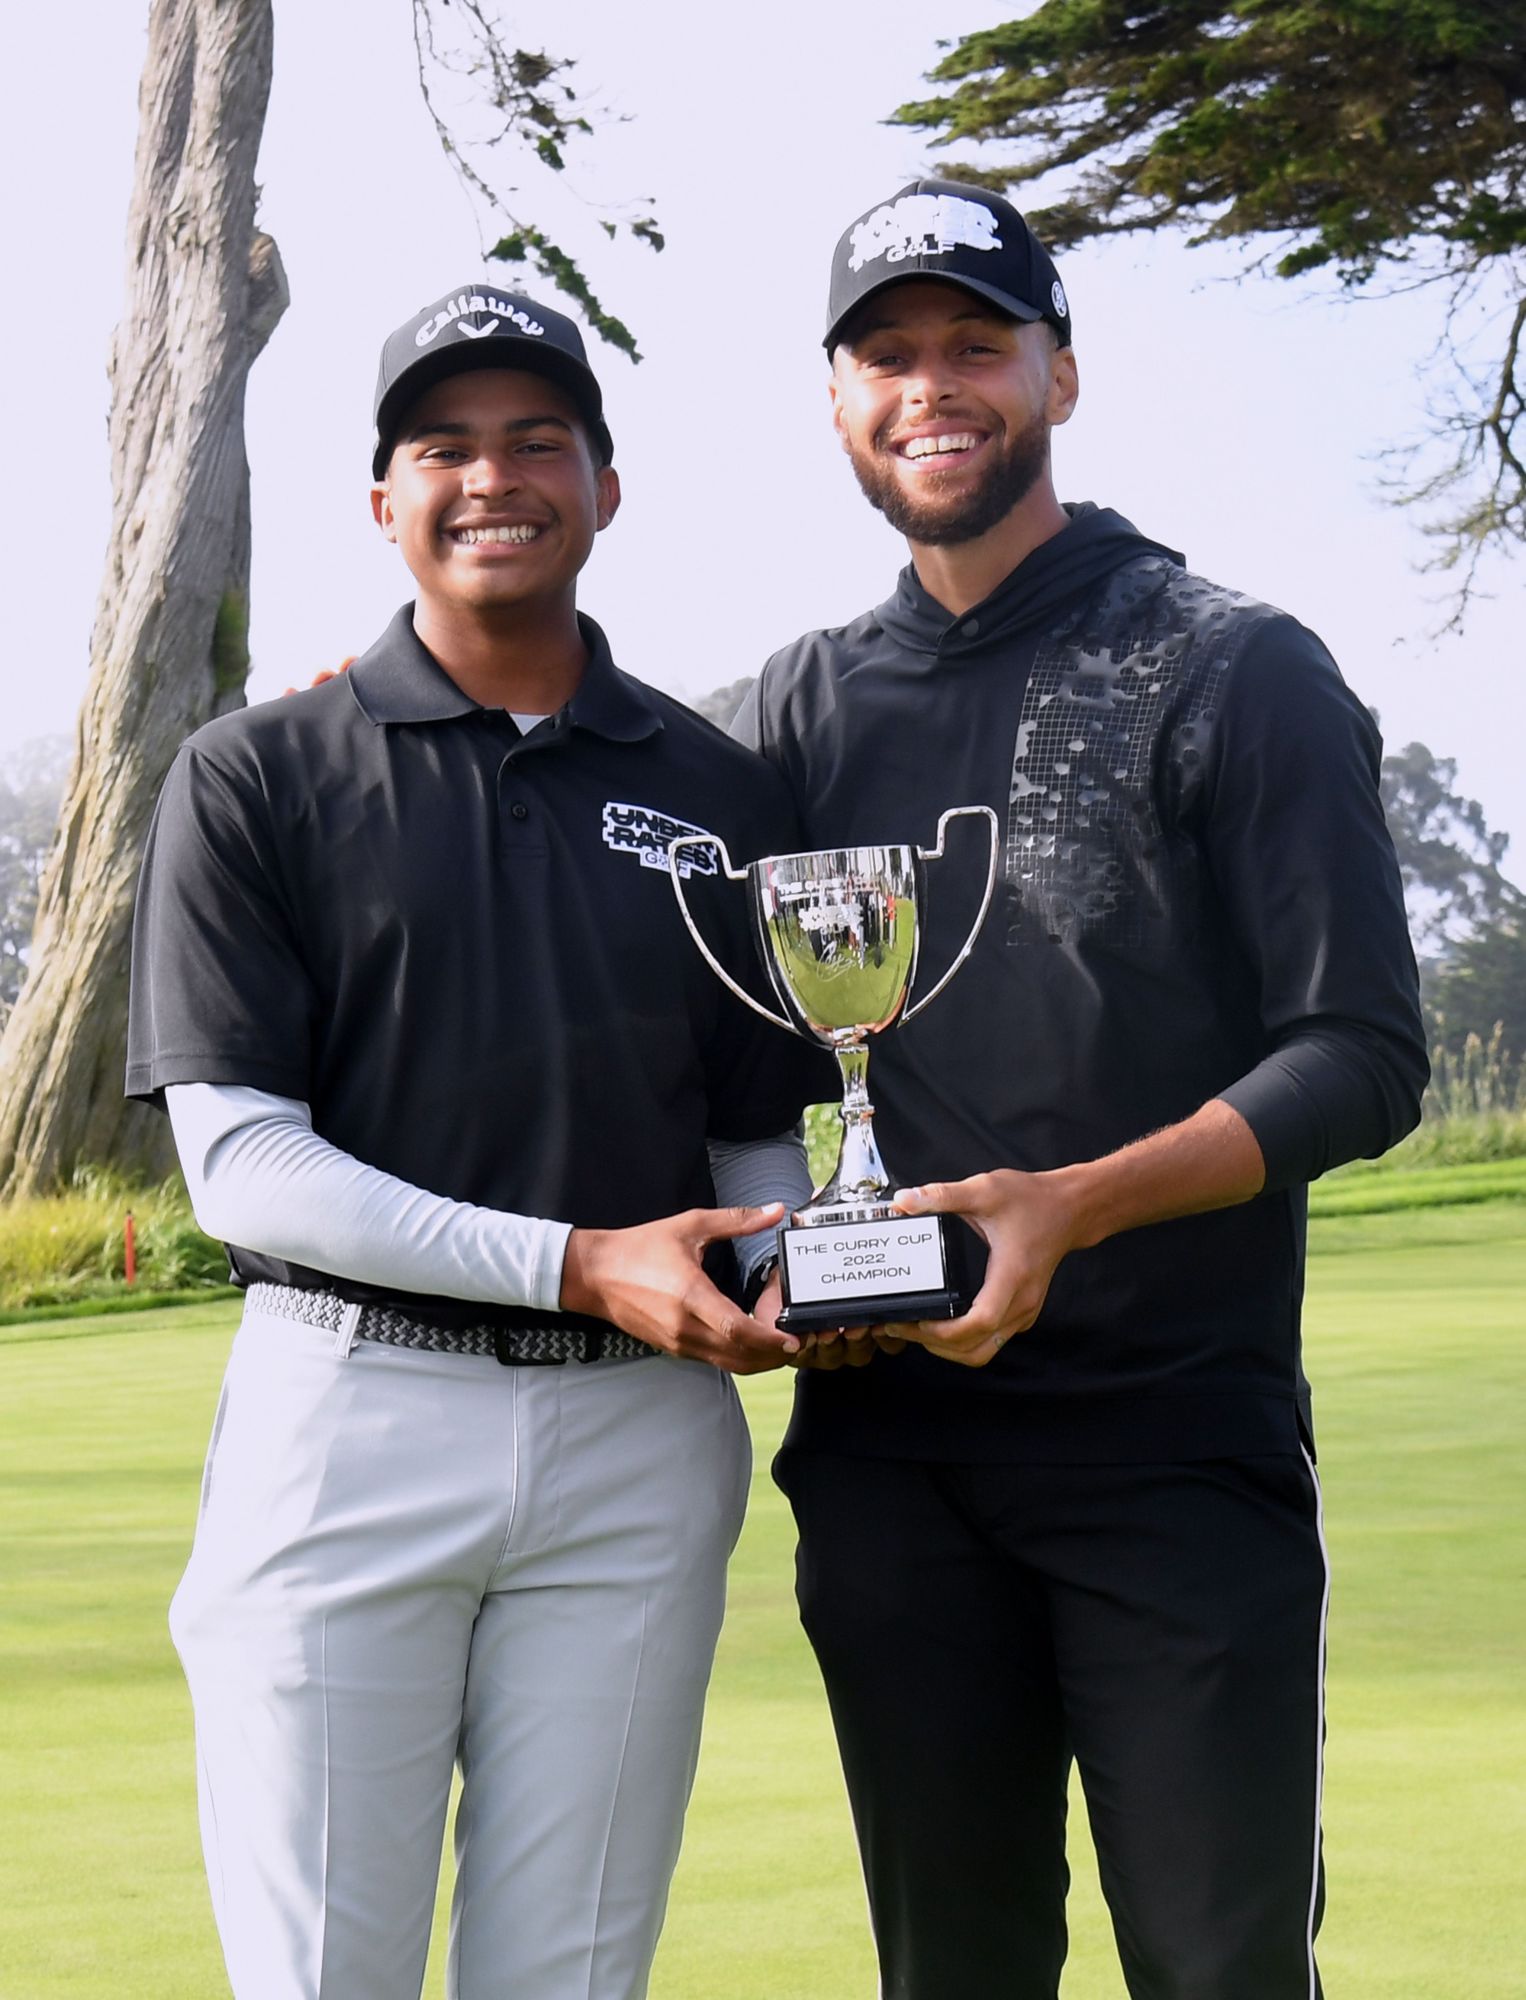 Roman Solomon poses with Steph Curry after winning the inaugural Underrated Golf Curry Cup in San Francisco. (Courtesy photo.)